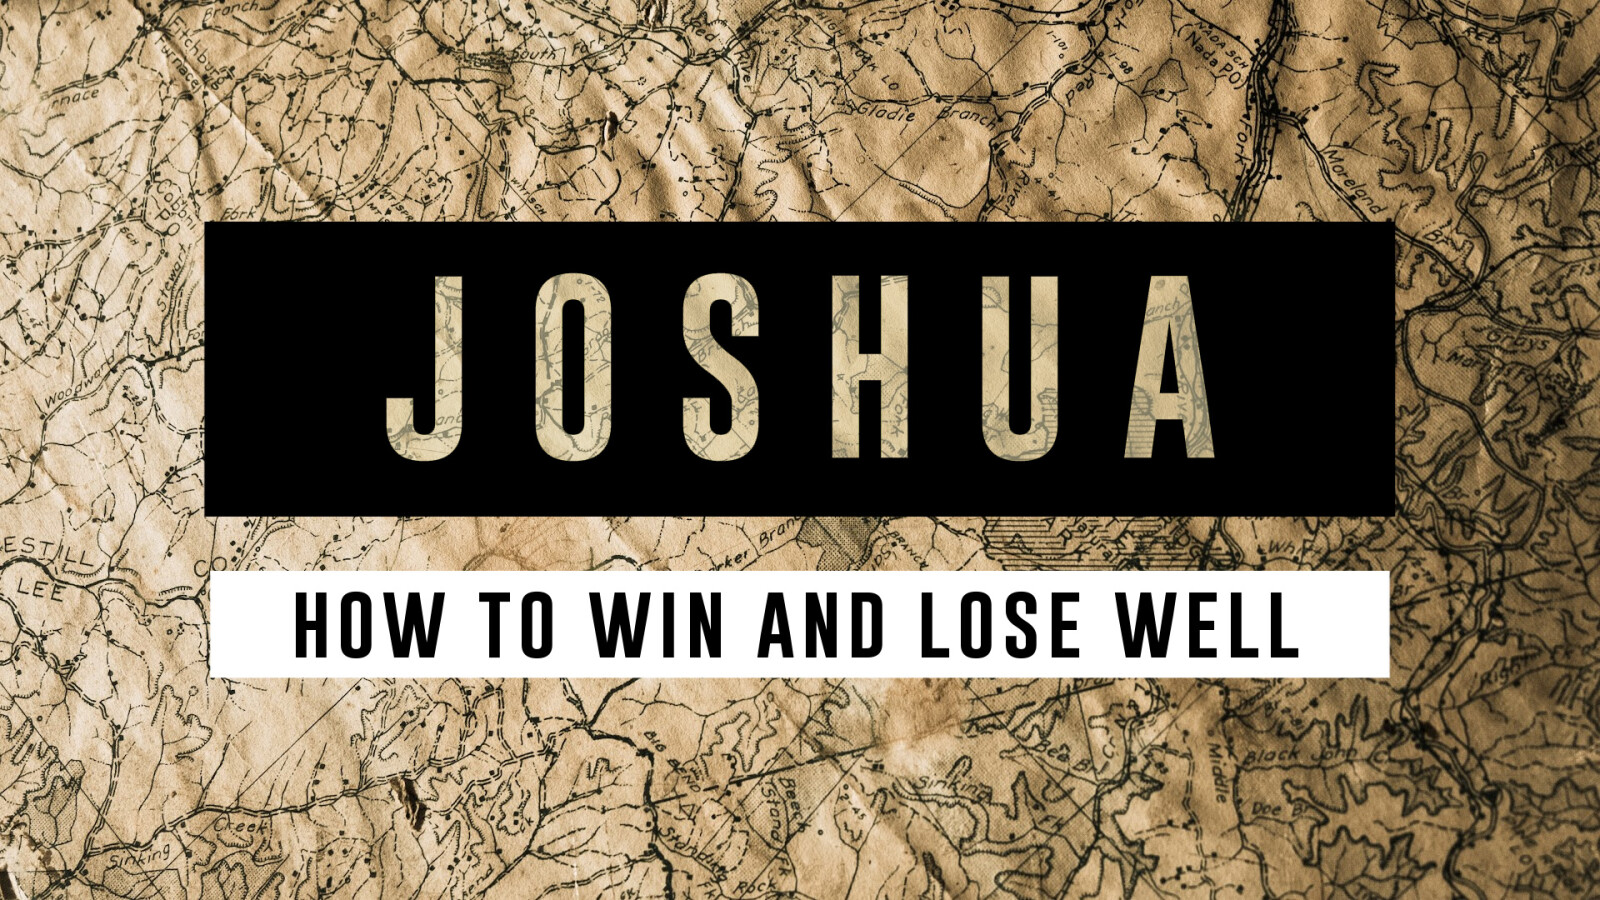 Joshua: How to Win and Lose Well